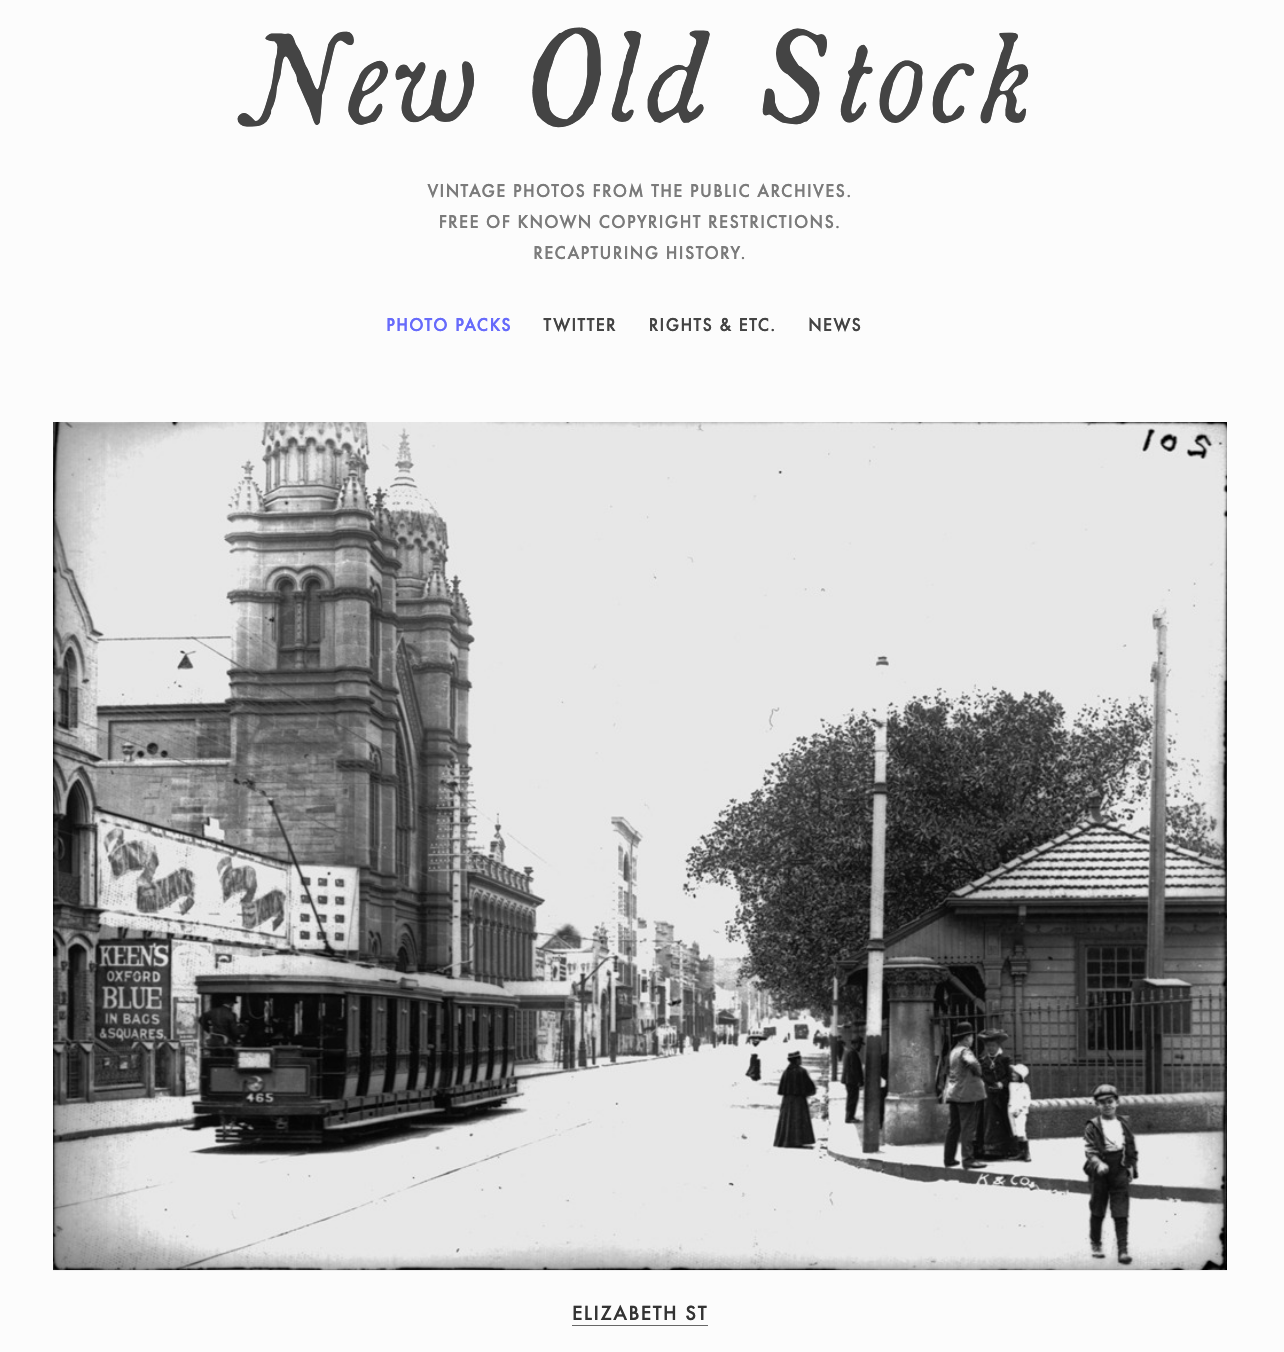 New Old Stock website to find royalty free images for your blog posts.